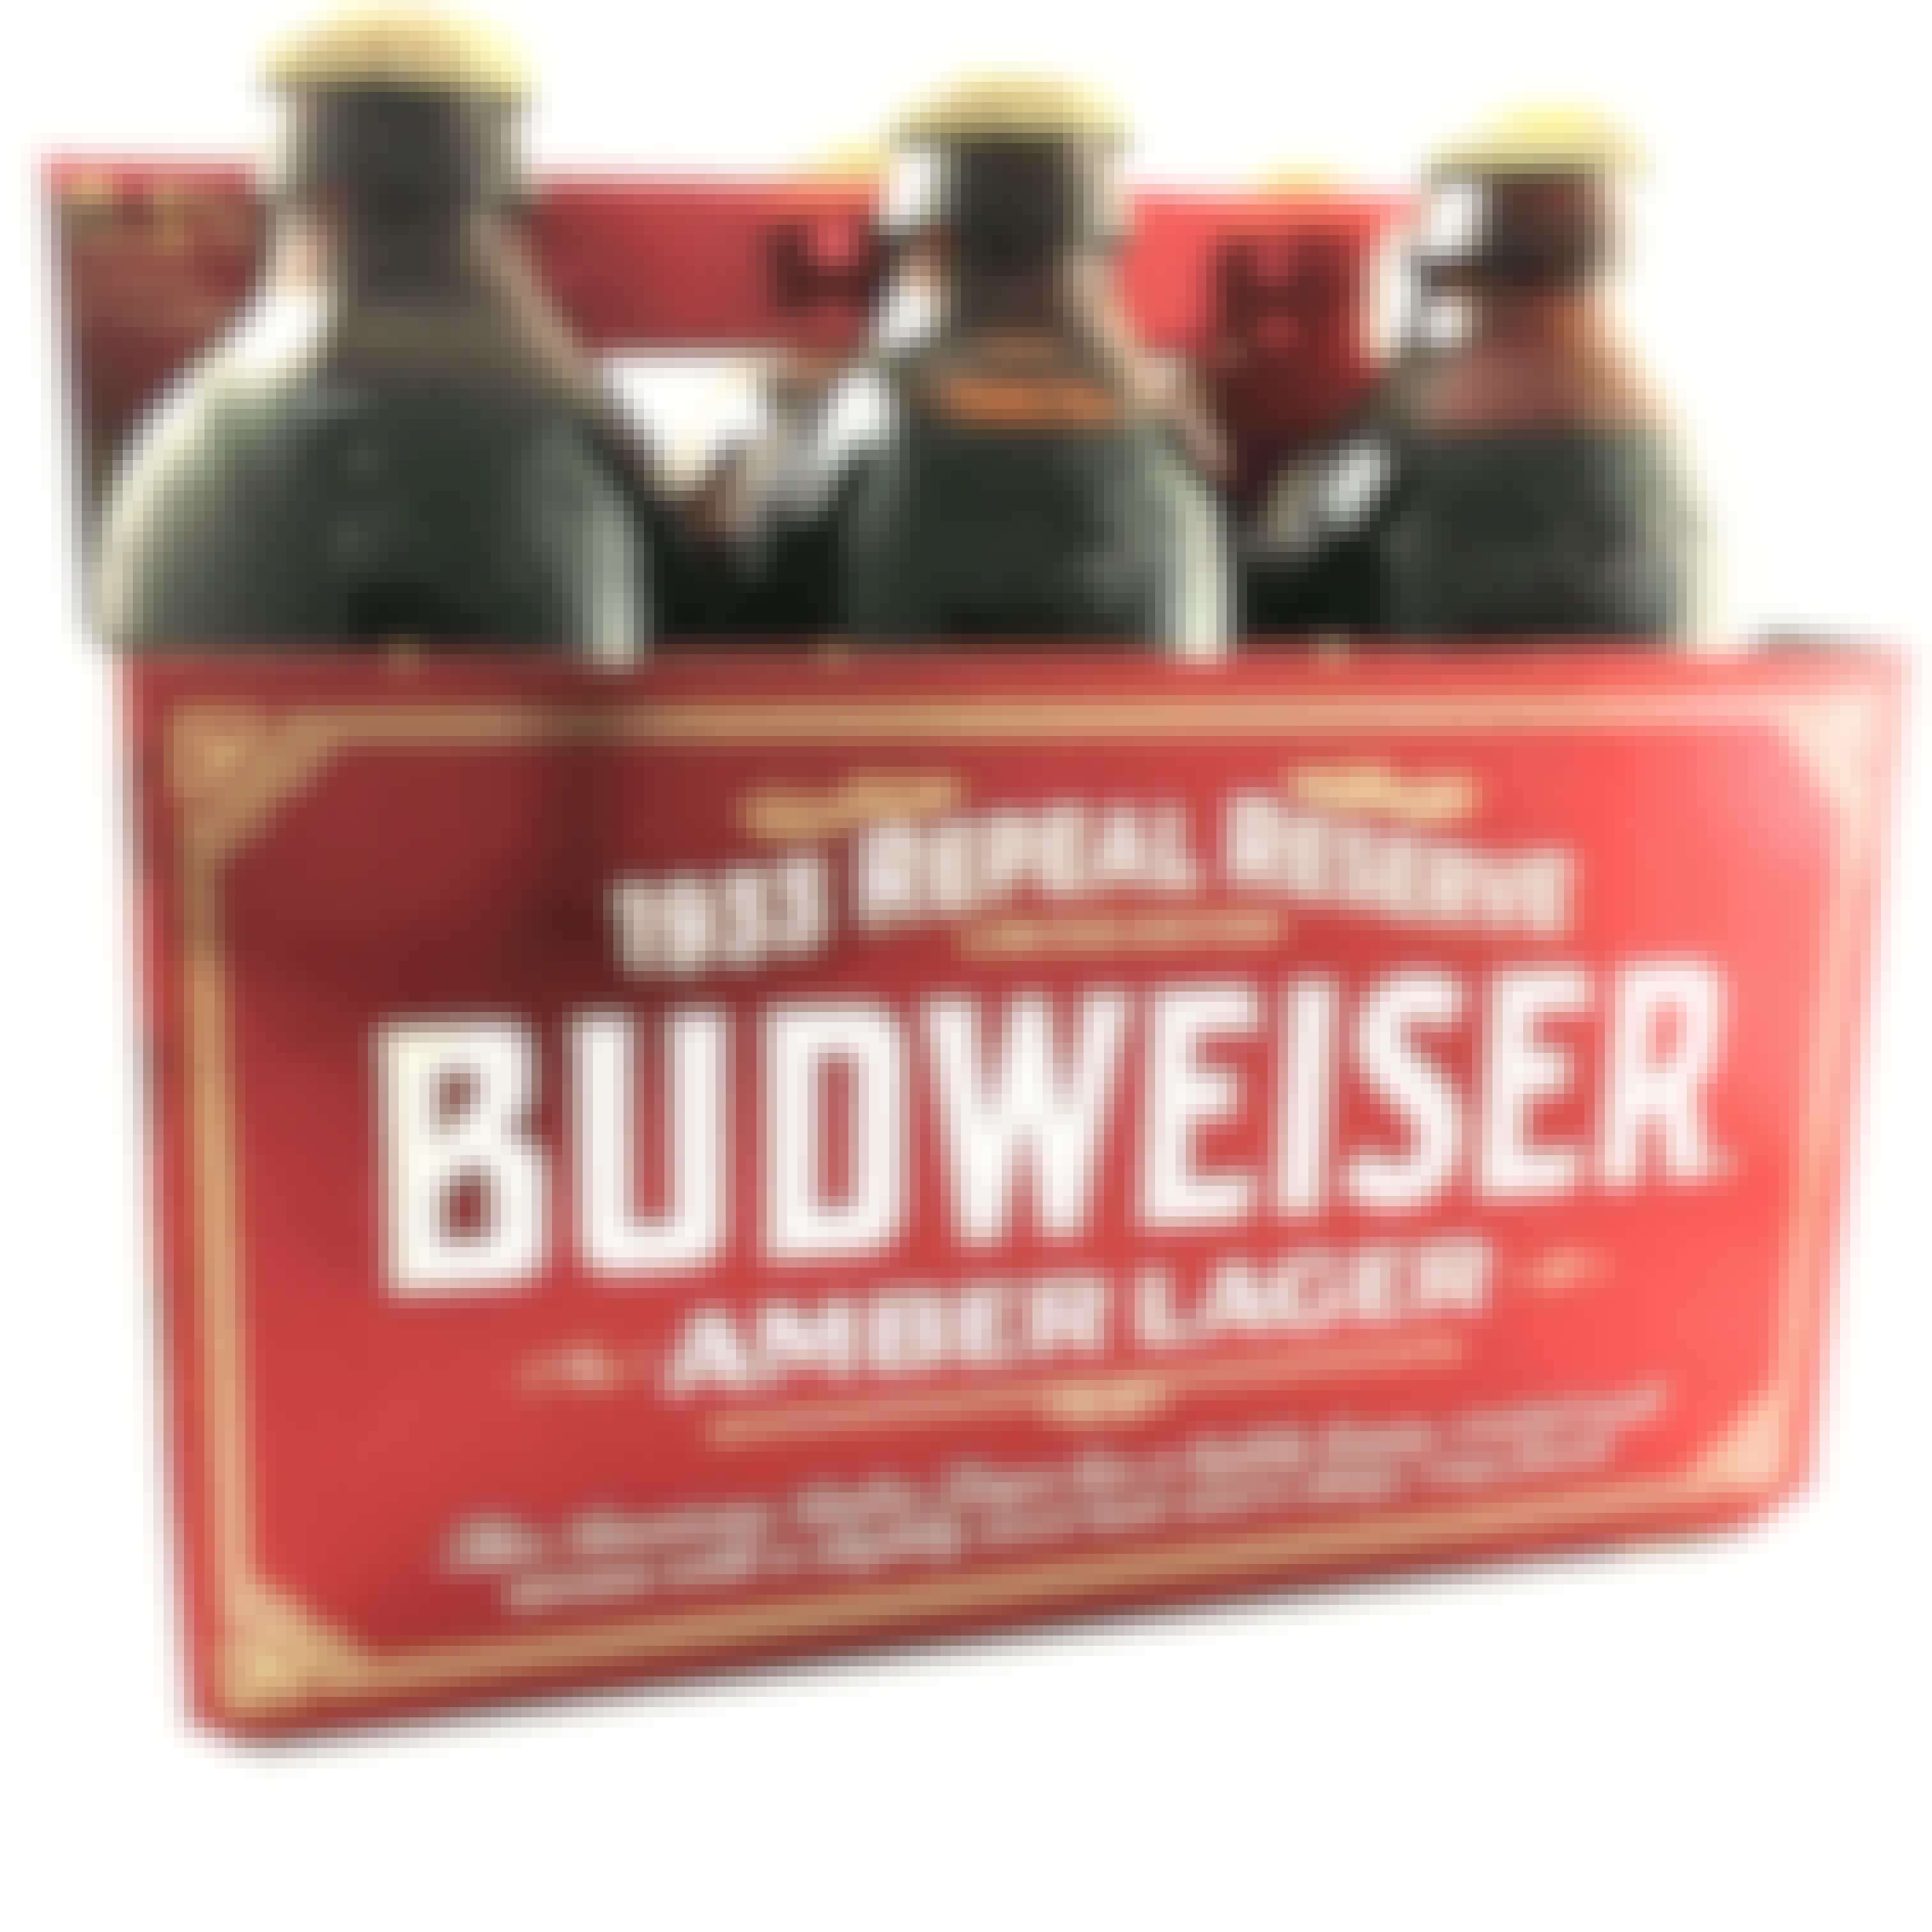 Budweiser Reserve Jim Beam Copper Lager 6 pack 12 oz. Can